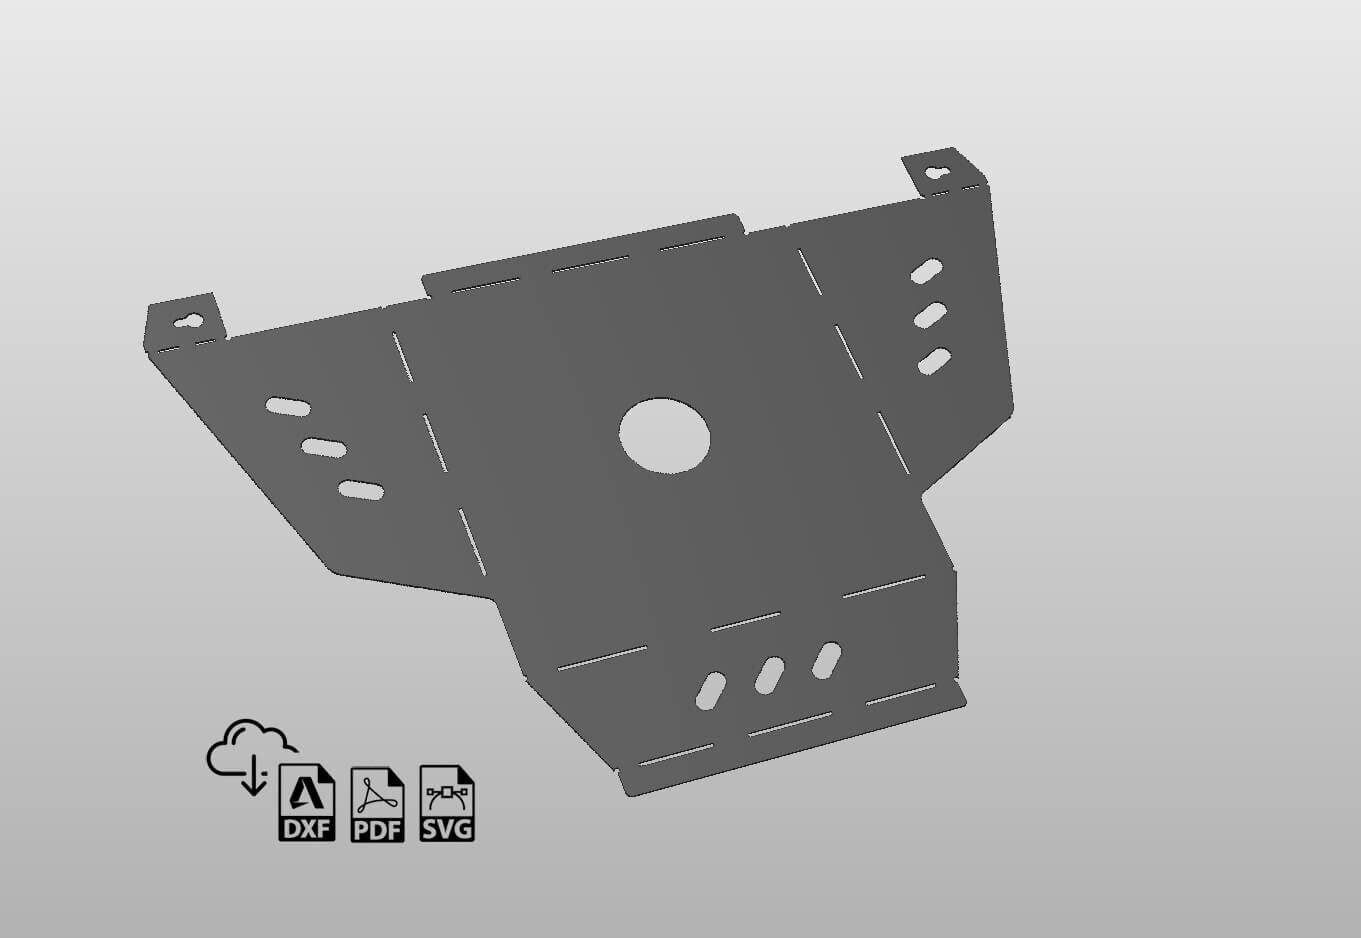 Wrench Holder 16 Tool Rack DXF file - StepFIVE40 DXF Files